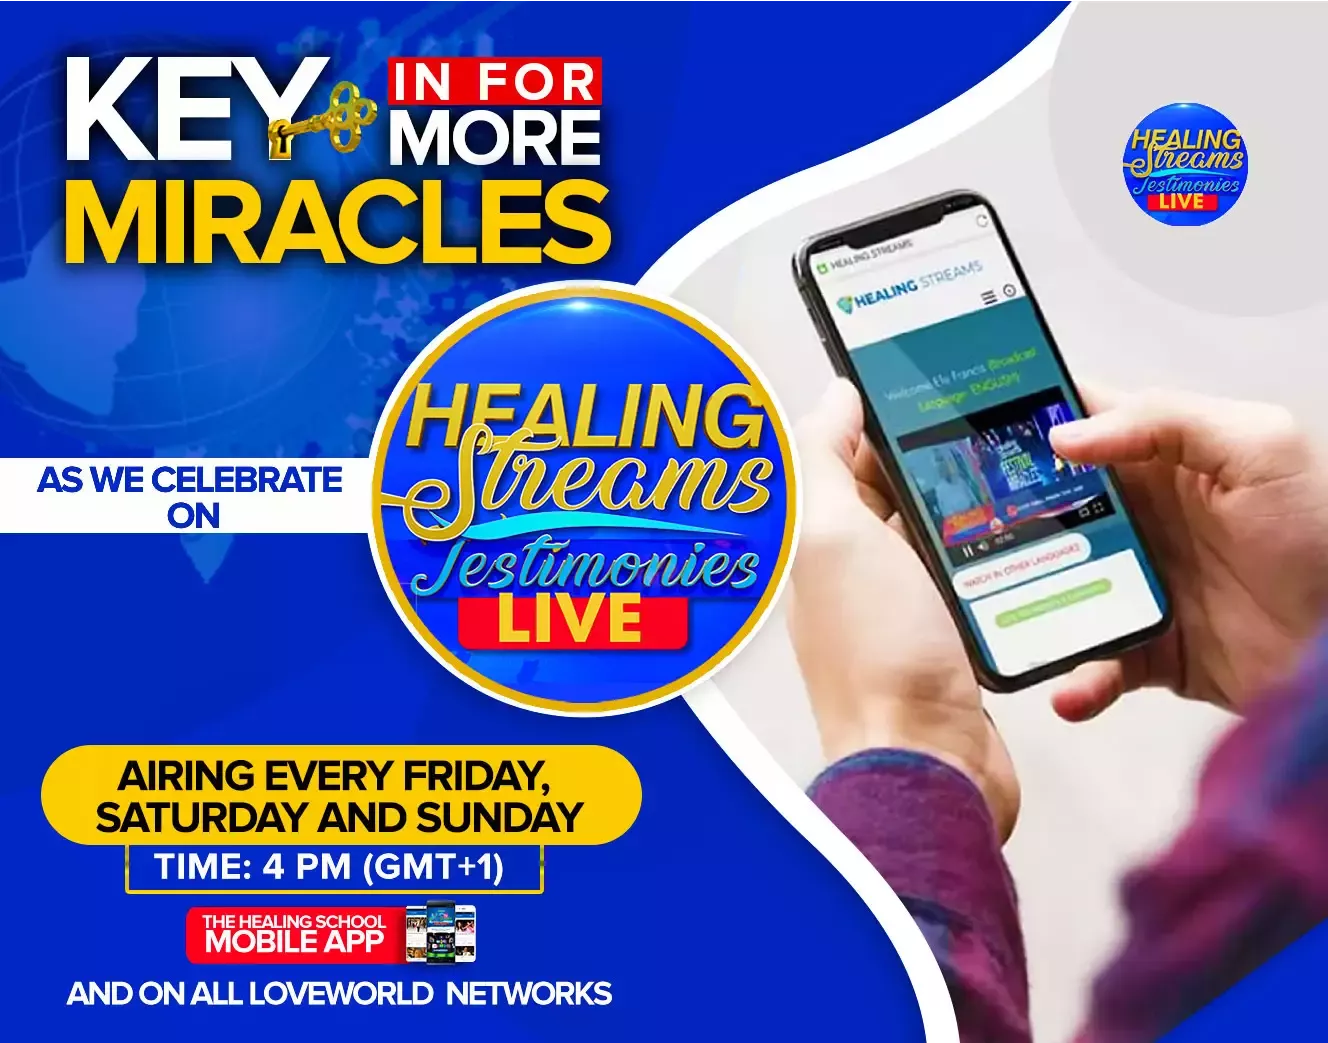 HEALING STREAMS TV - AN ATMOSPHERE OF FAITH FOR THE MIRACULOUS